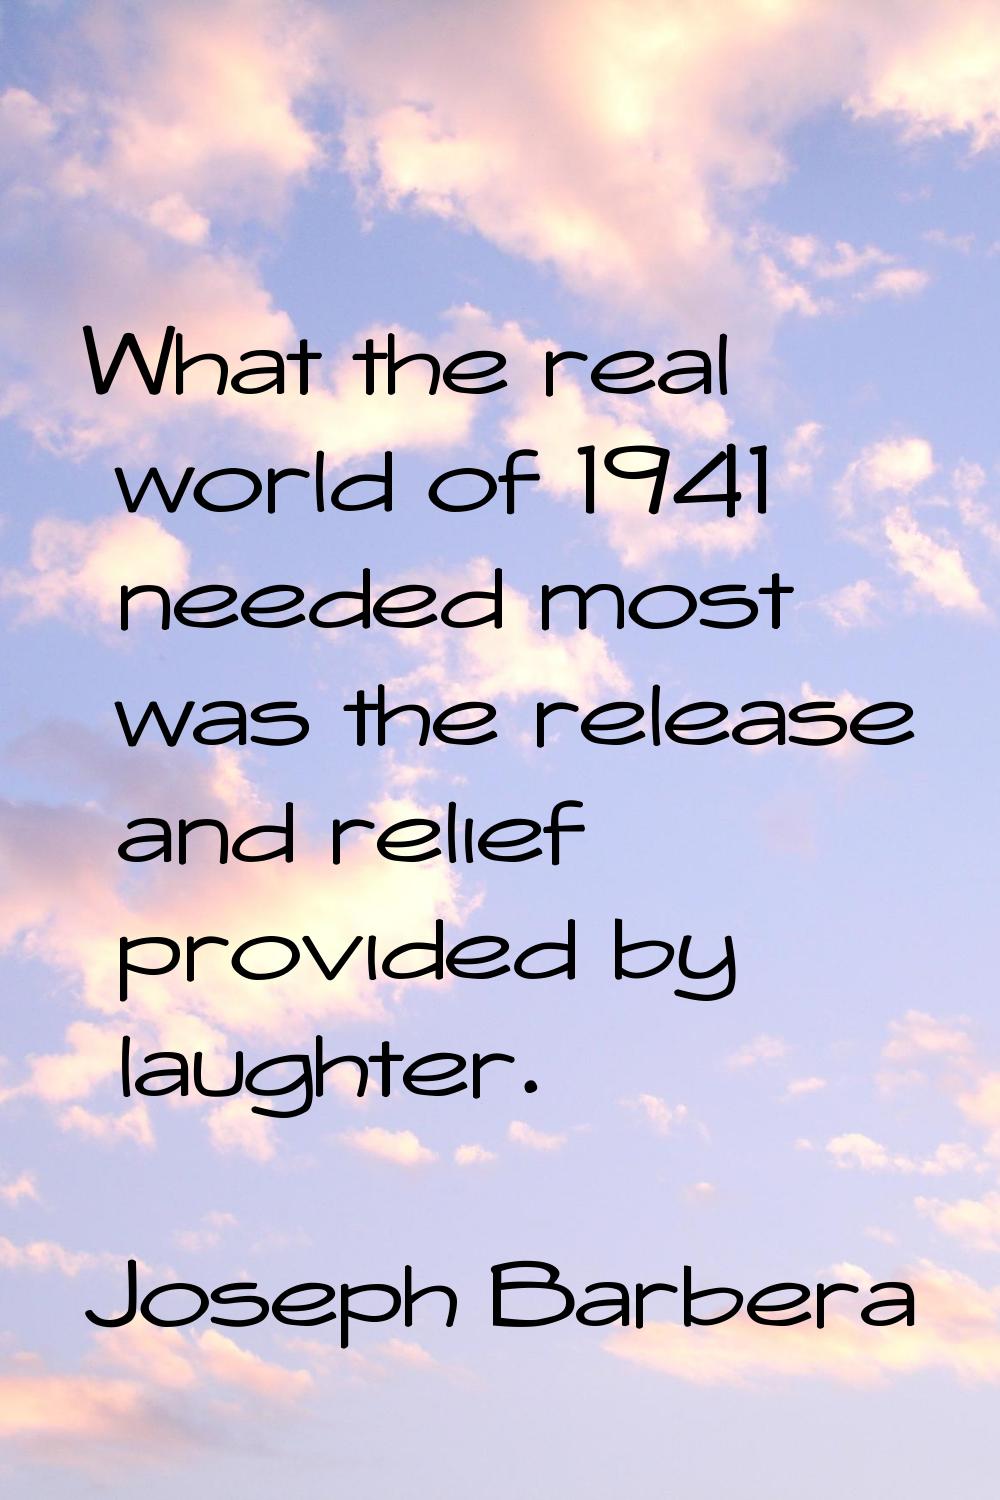 What the real world of 1941 needed most was the release and relief provided by laughter.